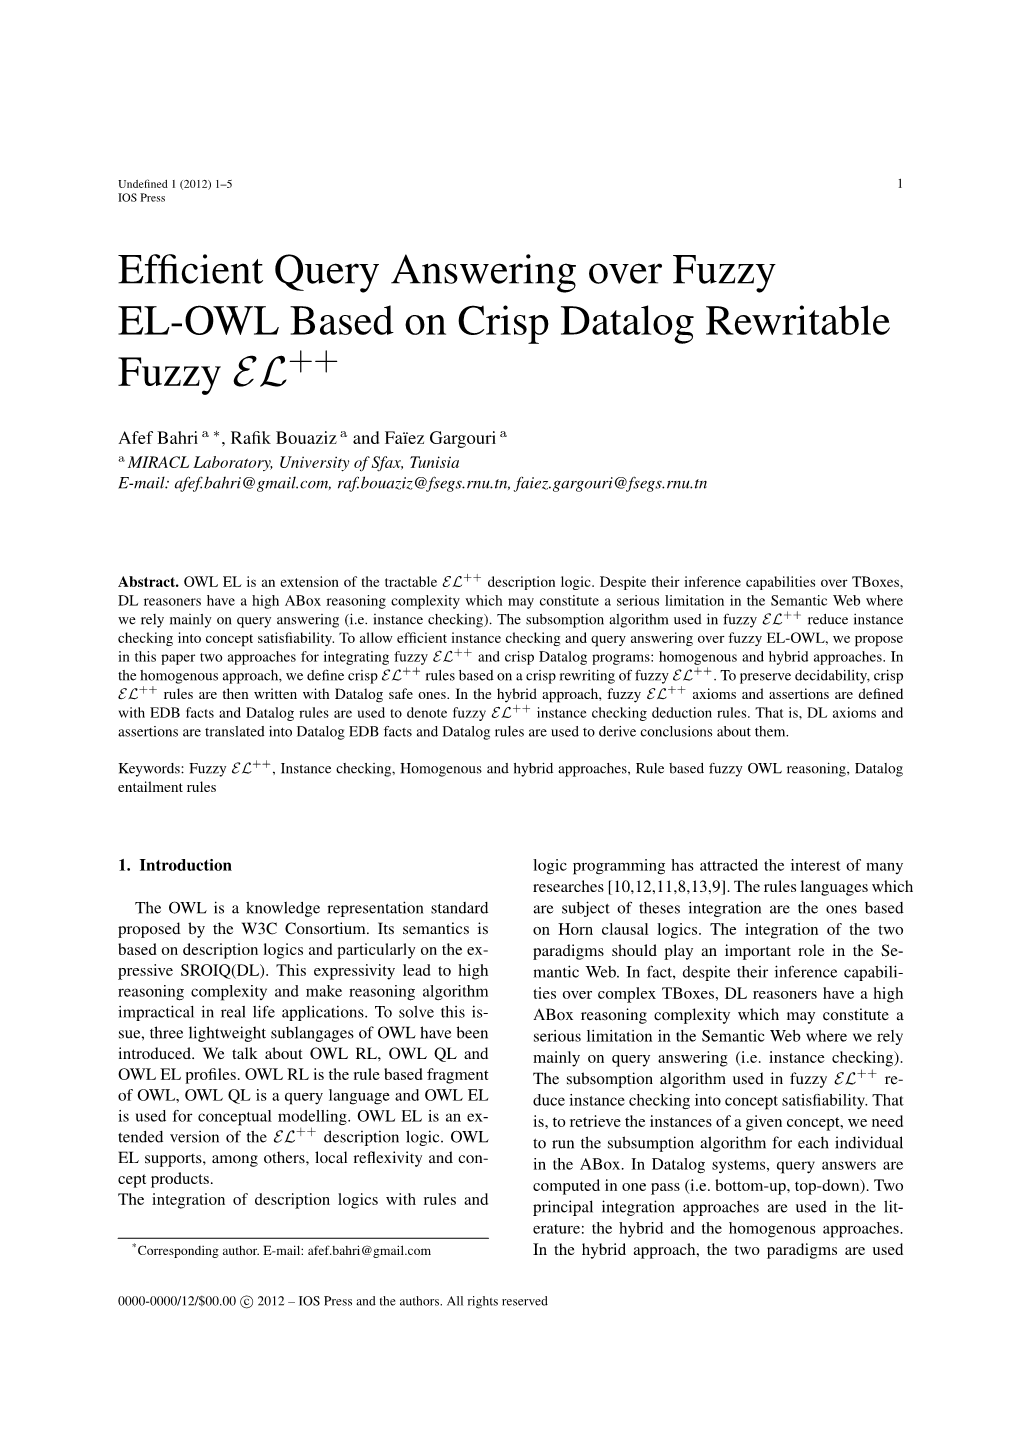 Efficient Query Answering Over Fuzzy EL-OWL Based on Crisp Datalog